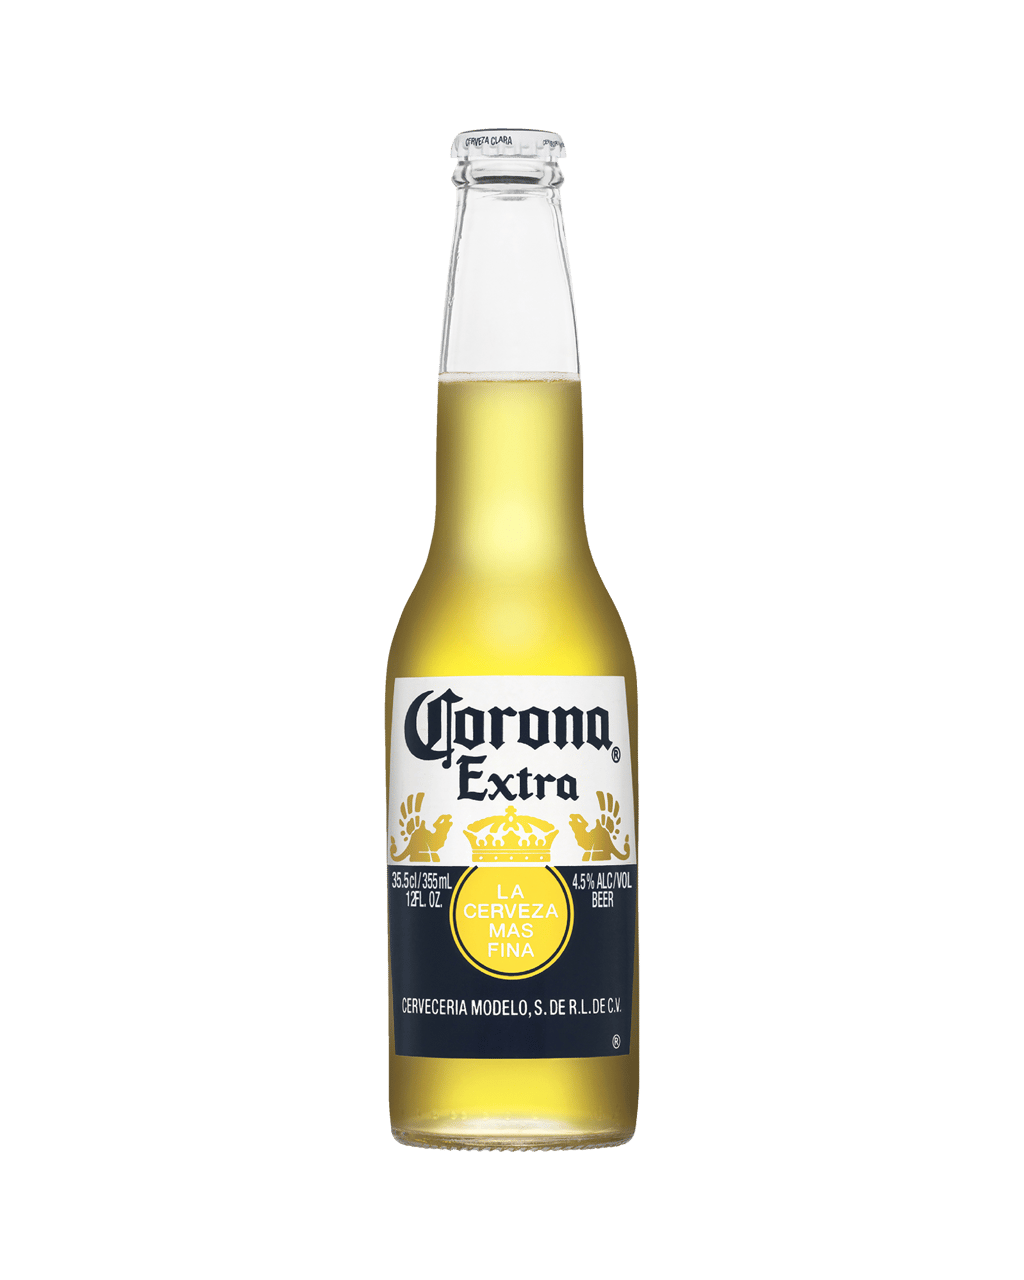 Buy Corona Extra Beer Bottles 355ml Online or Near You in Australia [with  Same Day Delivery* & Best Offers] - Dan Murphy's